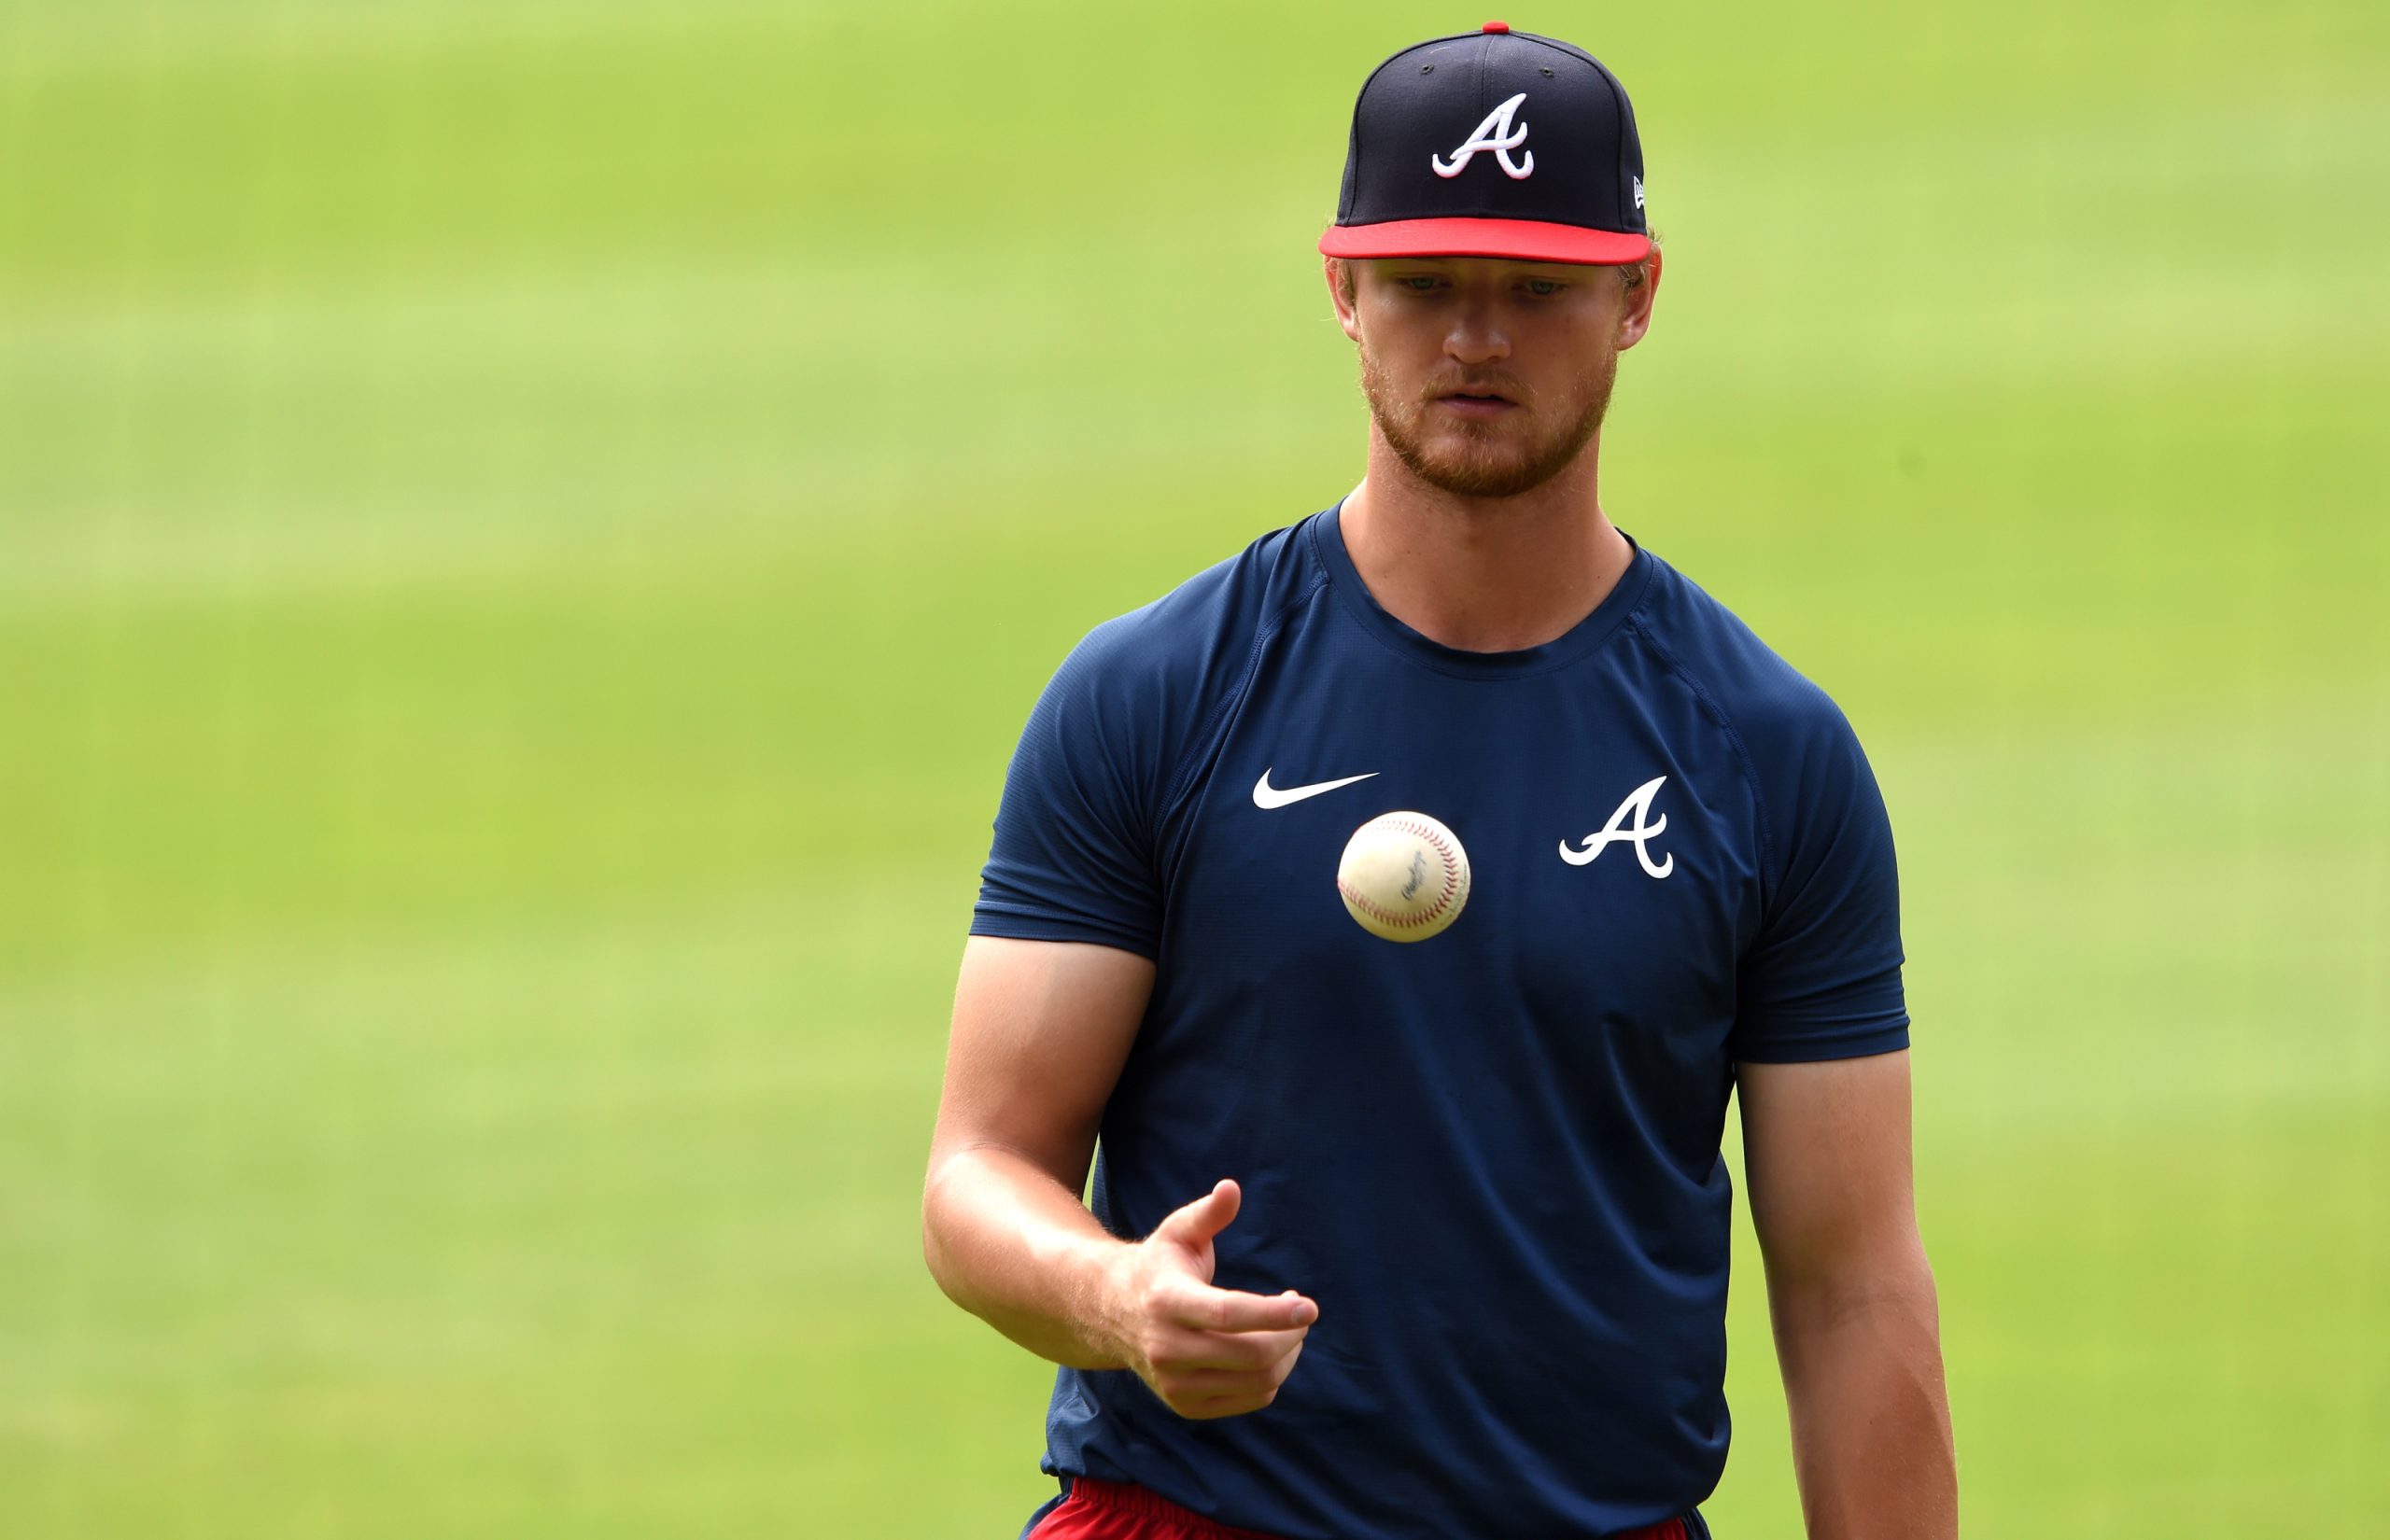 Michael Soroka comes back strong in first Triple-A start - Braves